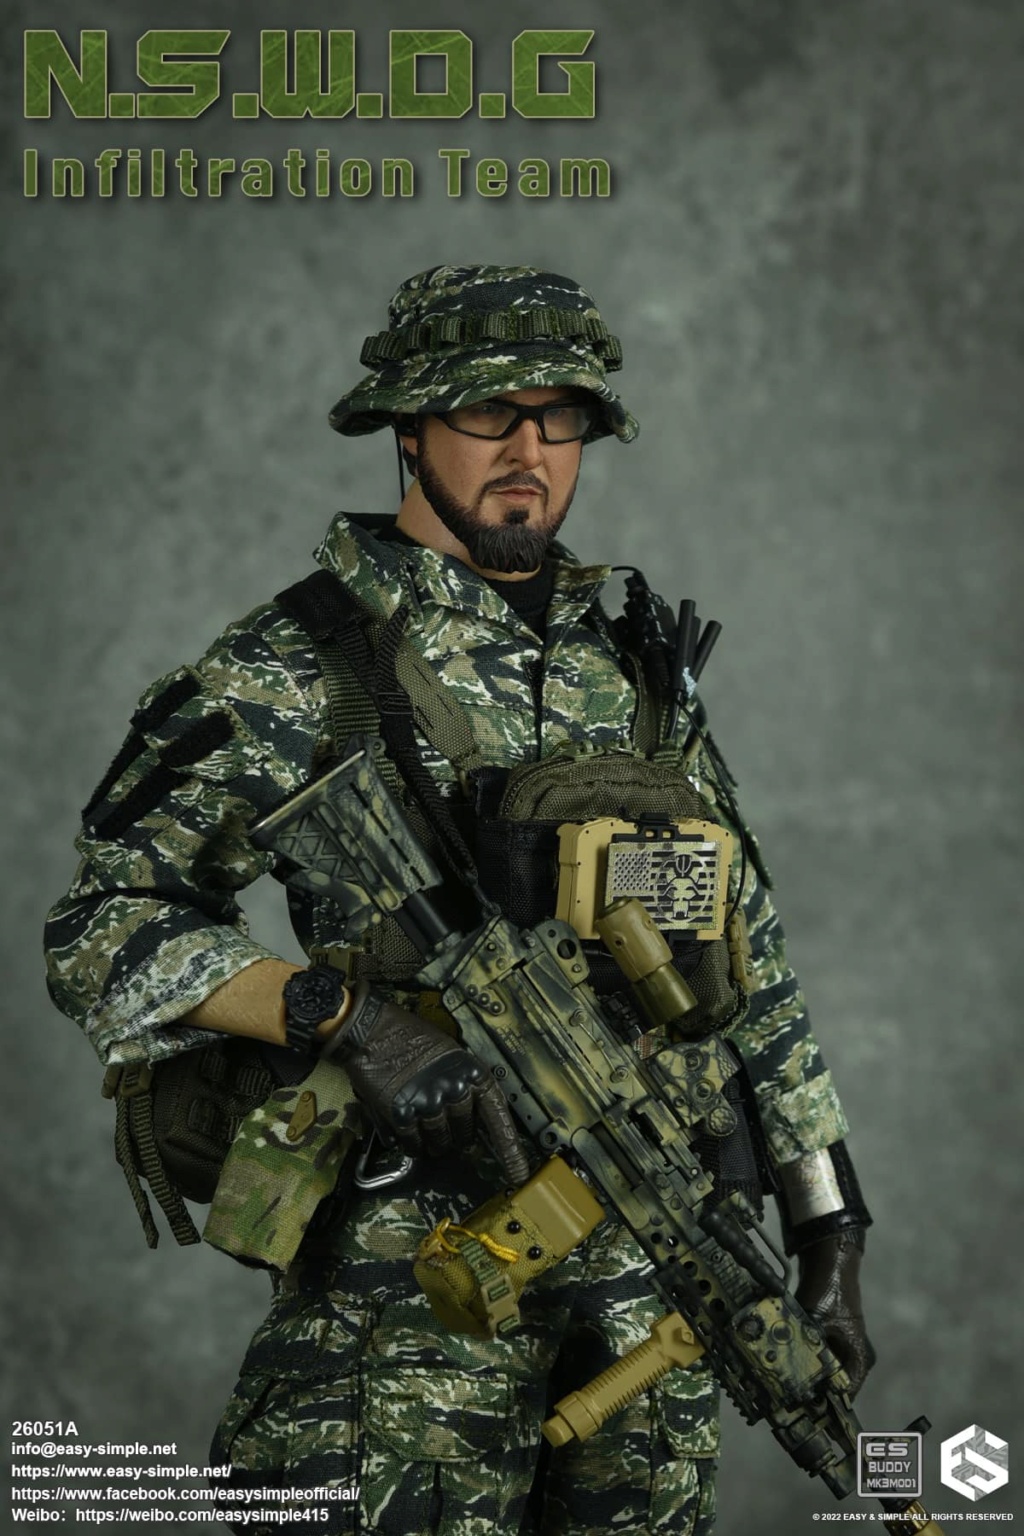 InfilitrationTeam - NEW PRODUCT: EASY AND SIMPLE 1/6 SCALE FIGURE: N.S.W.D.G INFILTRATION TEAM - (2 Versions) 16371